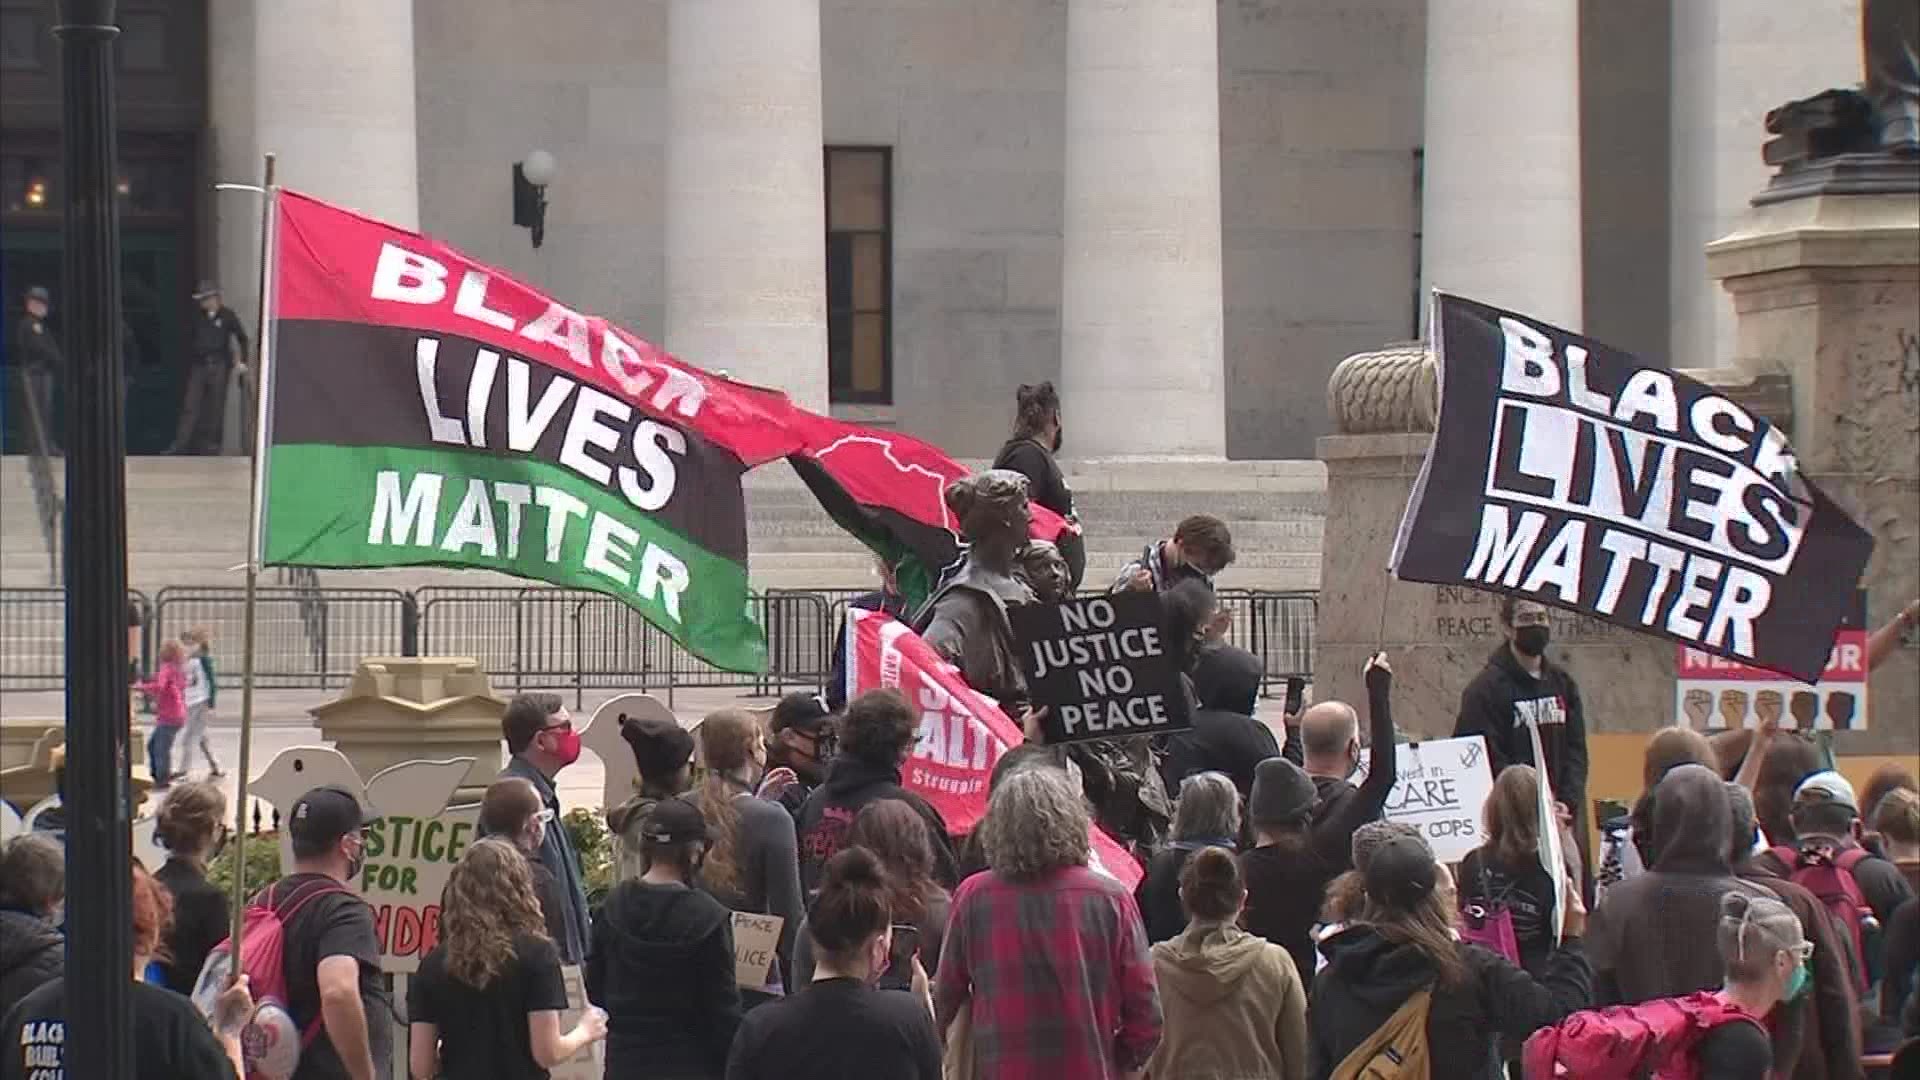 The protest started around noon at the Statehouse.